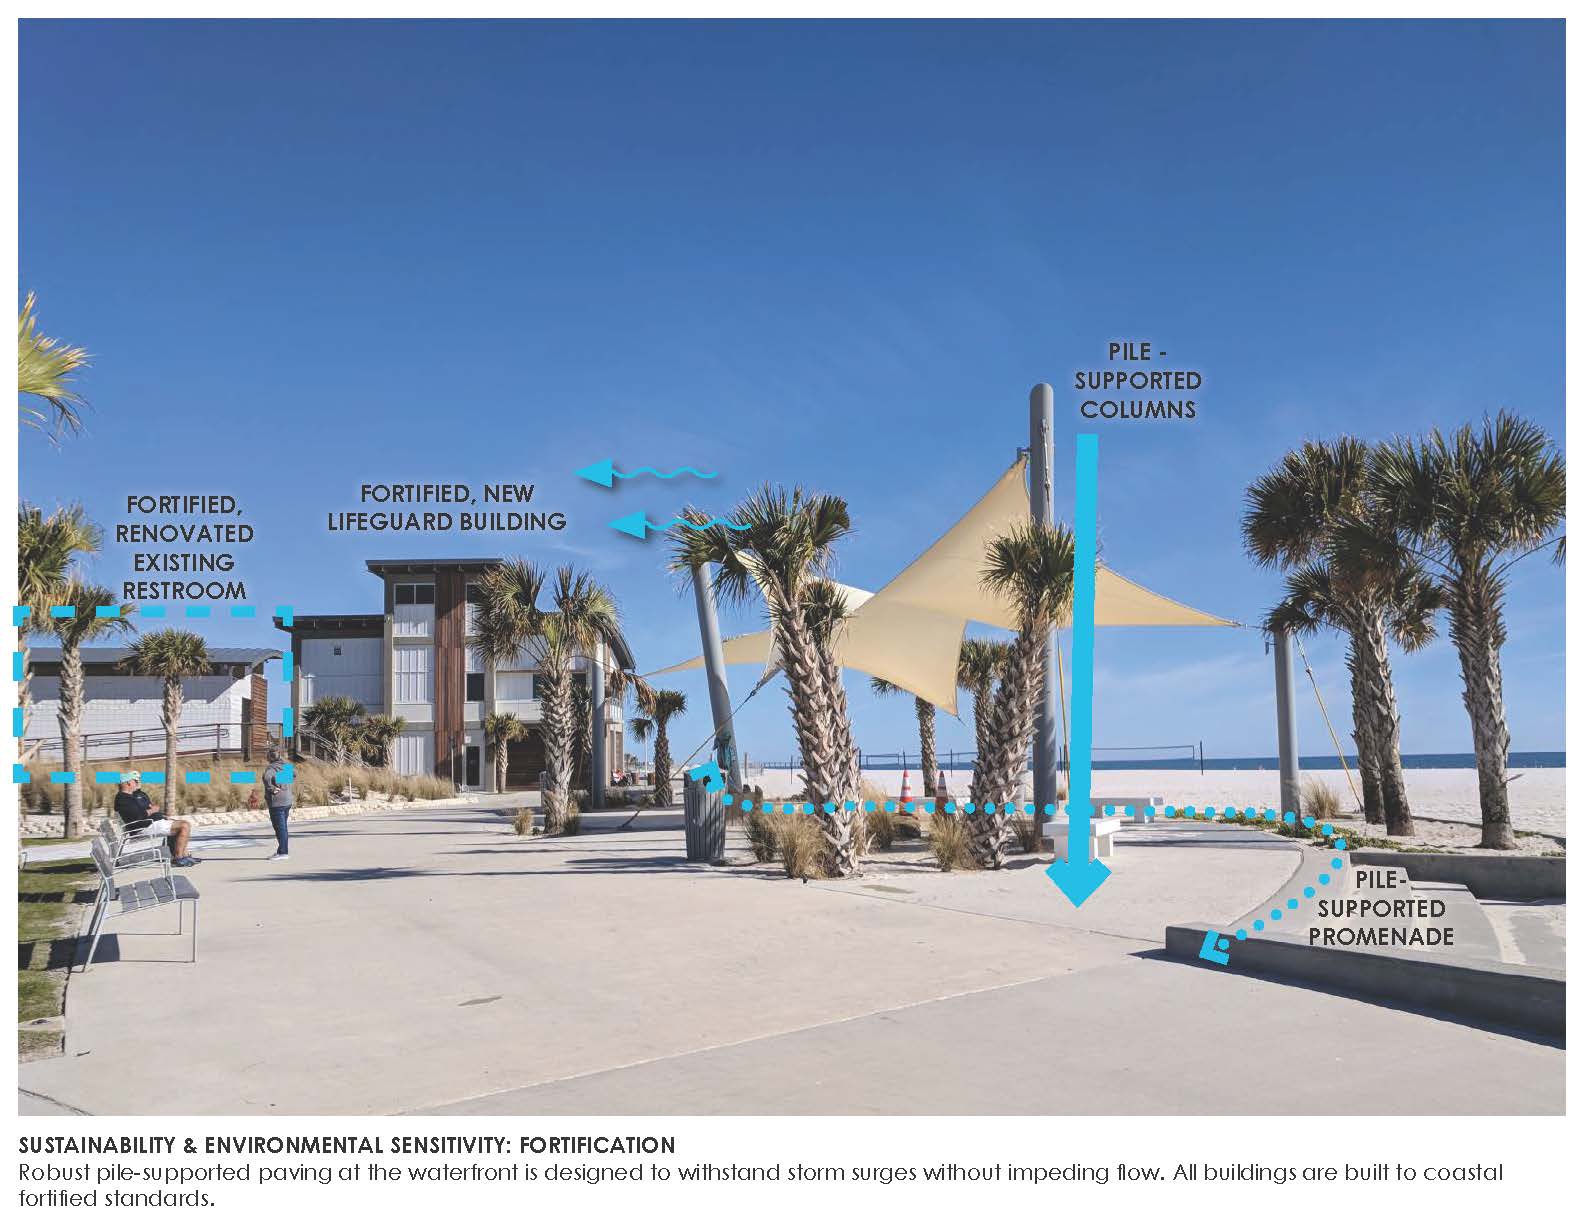 Gulf Place - Designing for Waterfront Resiliency TSW Planning, Architecture, Landscape Atlanta Chattanooga Tulsa